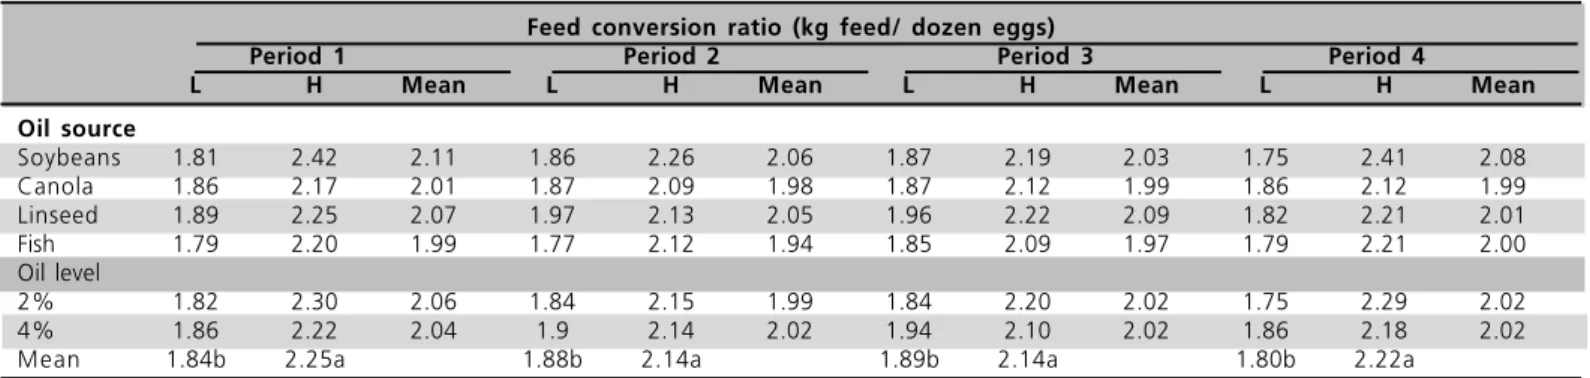 Table 8  - Mean feed conversion ratio (kg feed/kg eggs) of light and heavy layers per experimental period as a function of oil source and level.